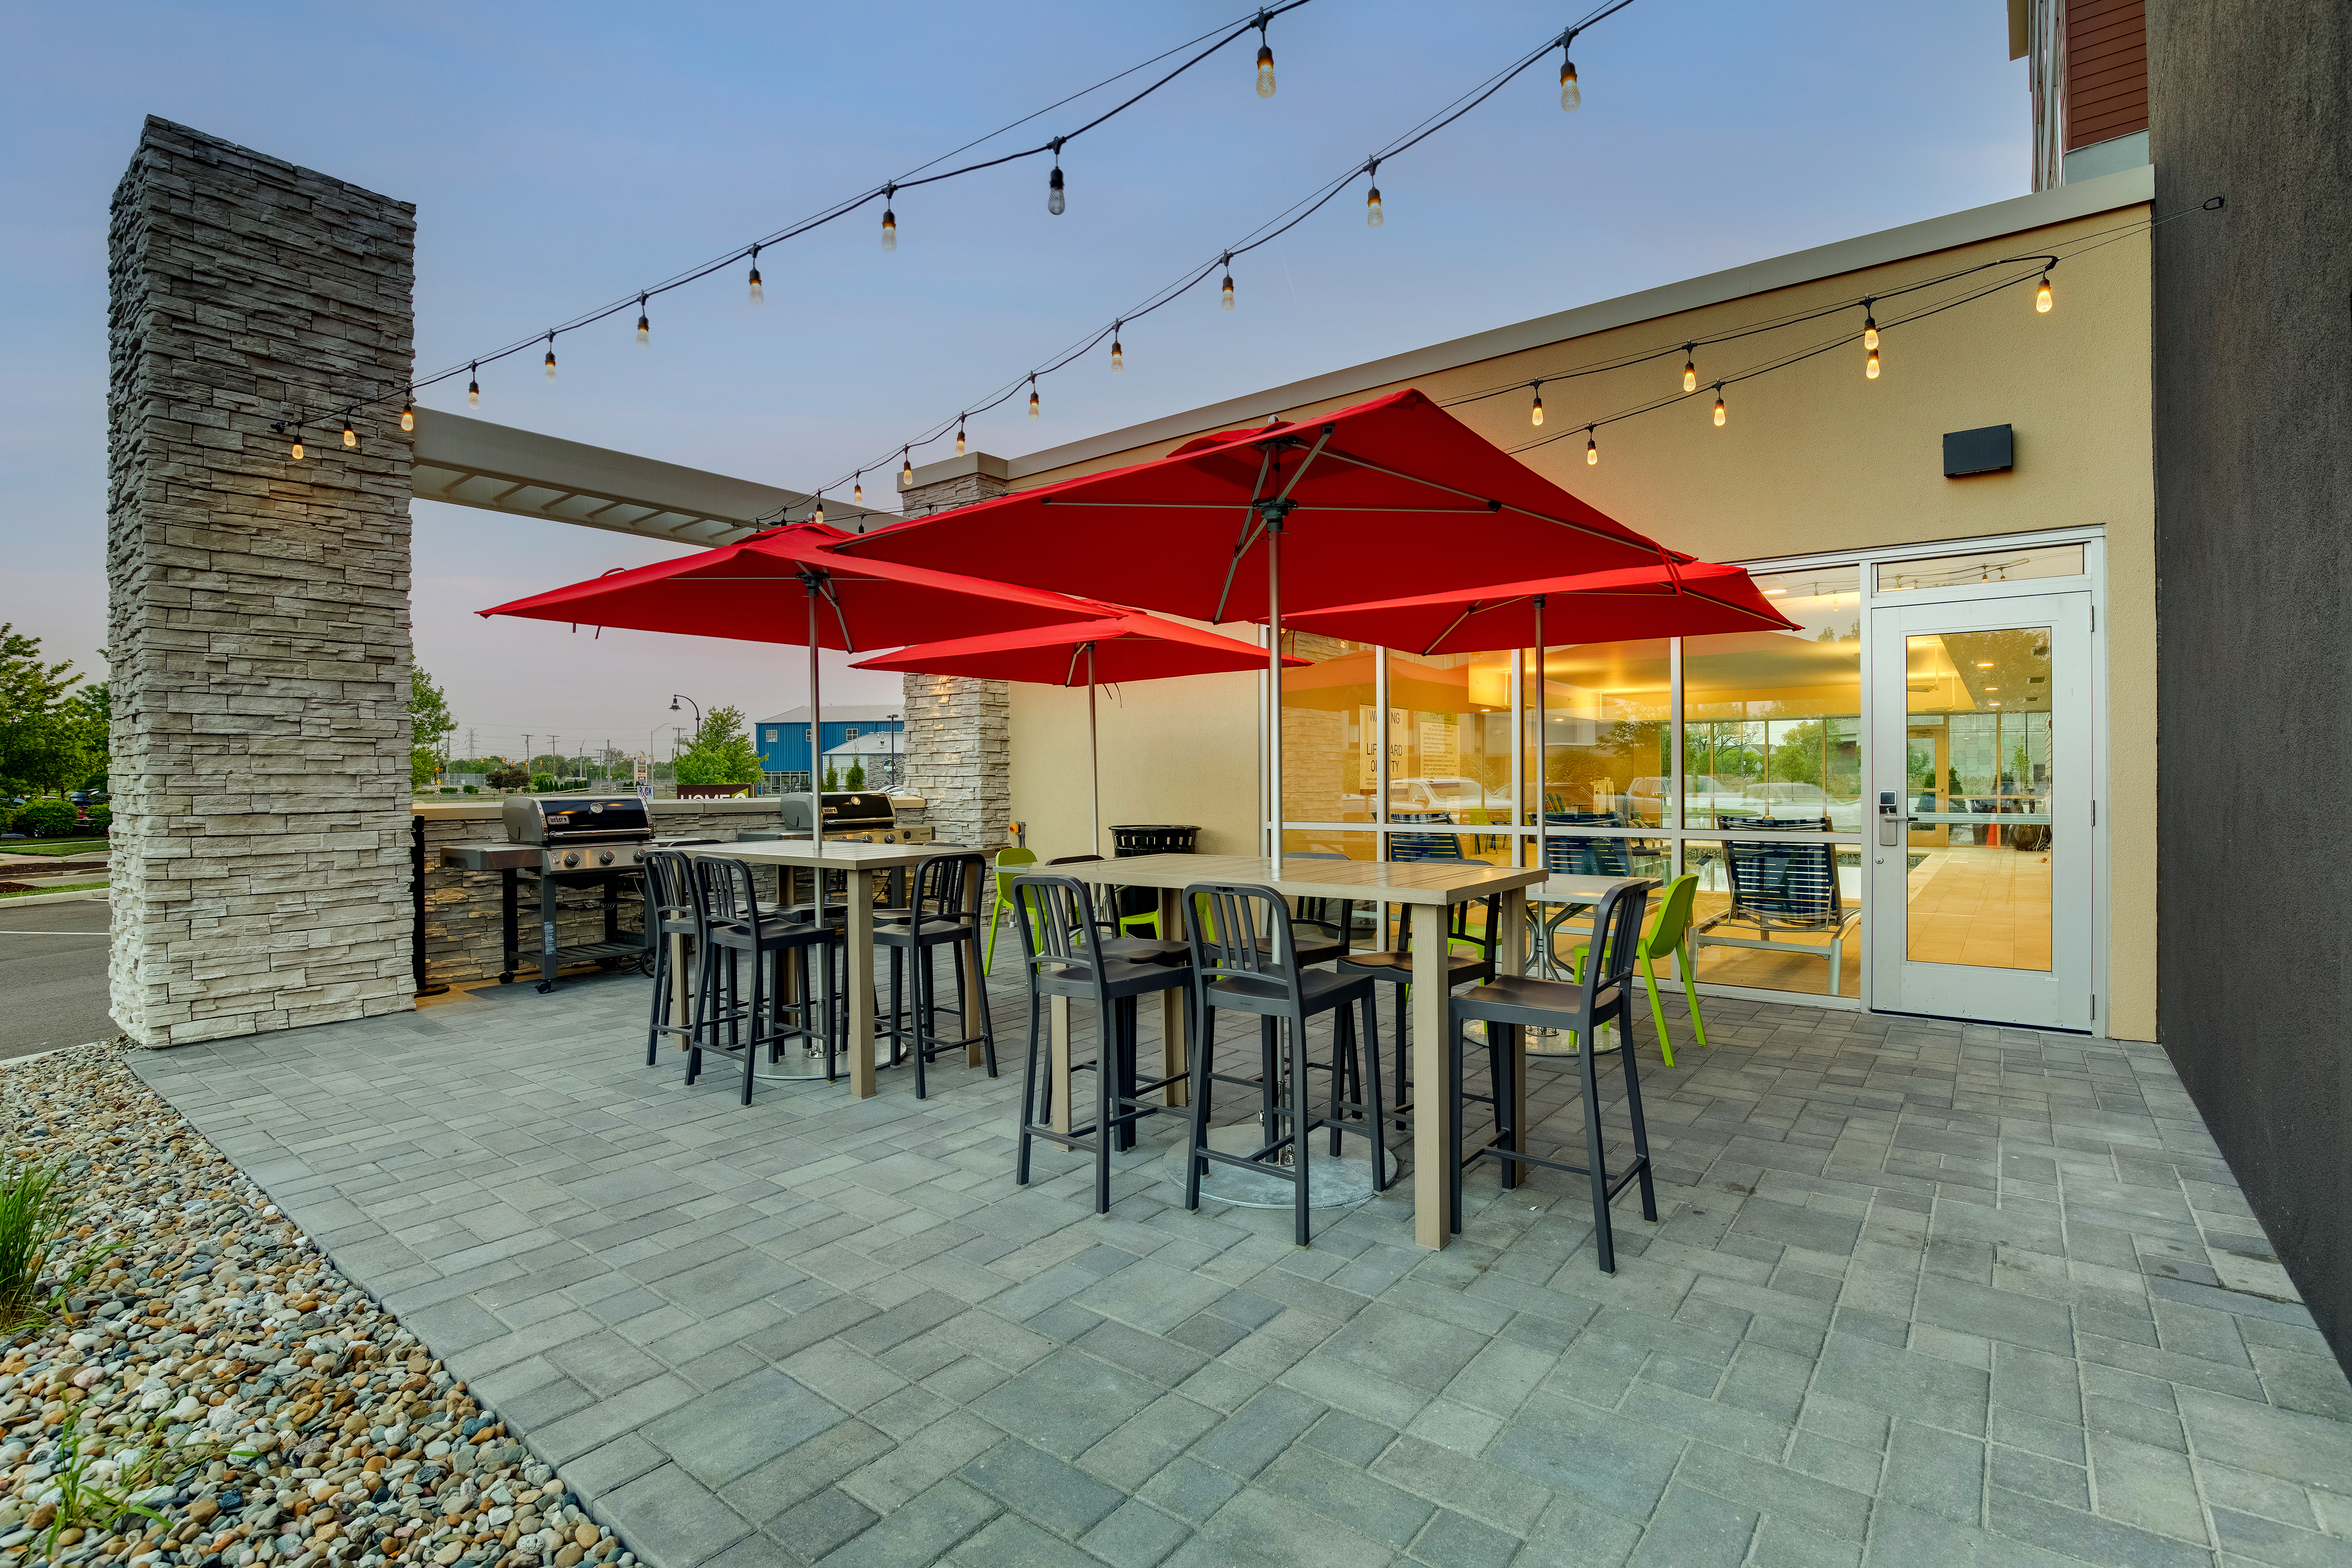 outdoor patio, bbq grills, tables, chairs, umbrellas